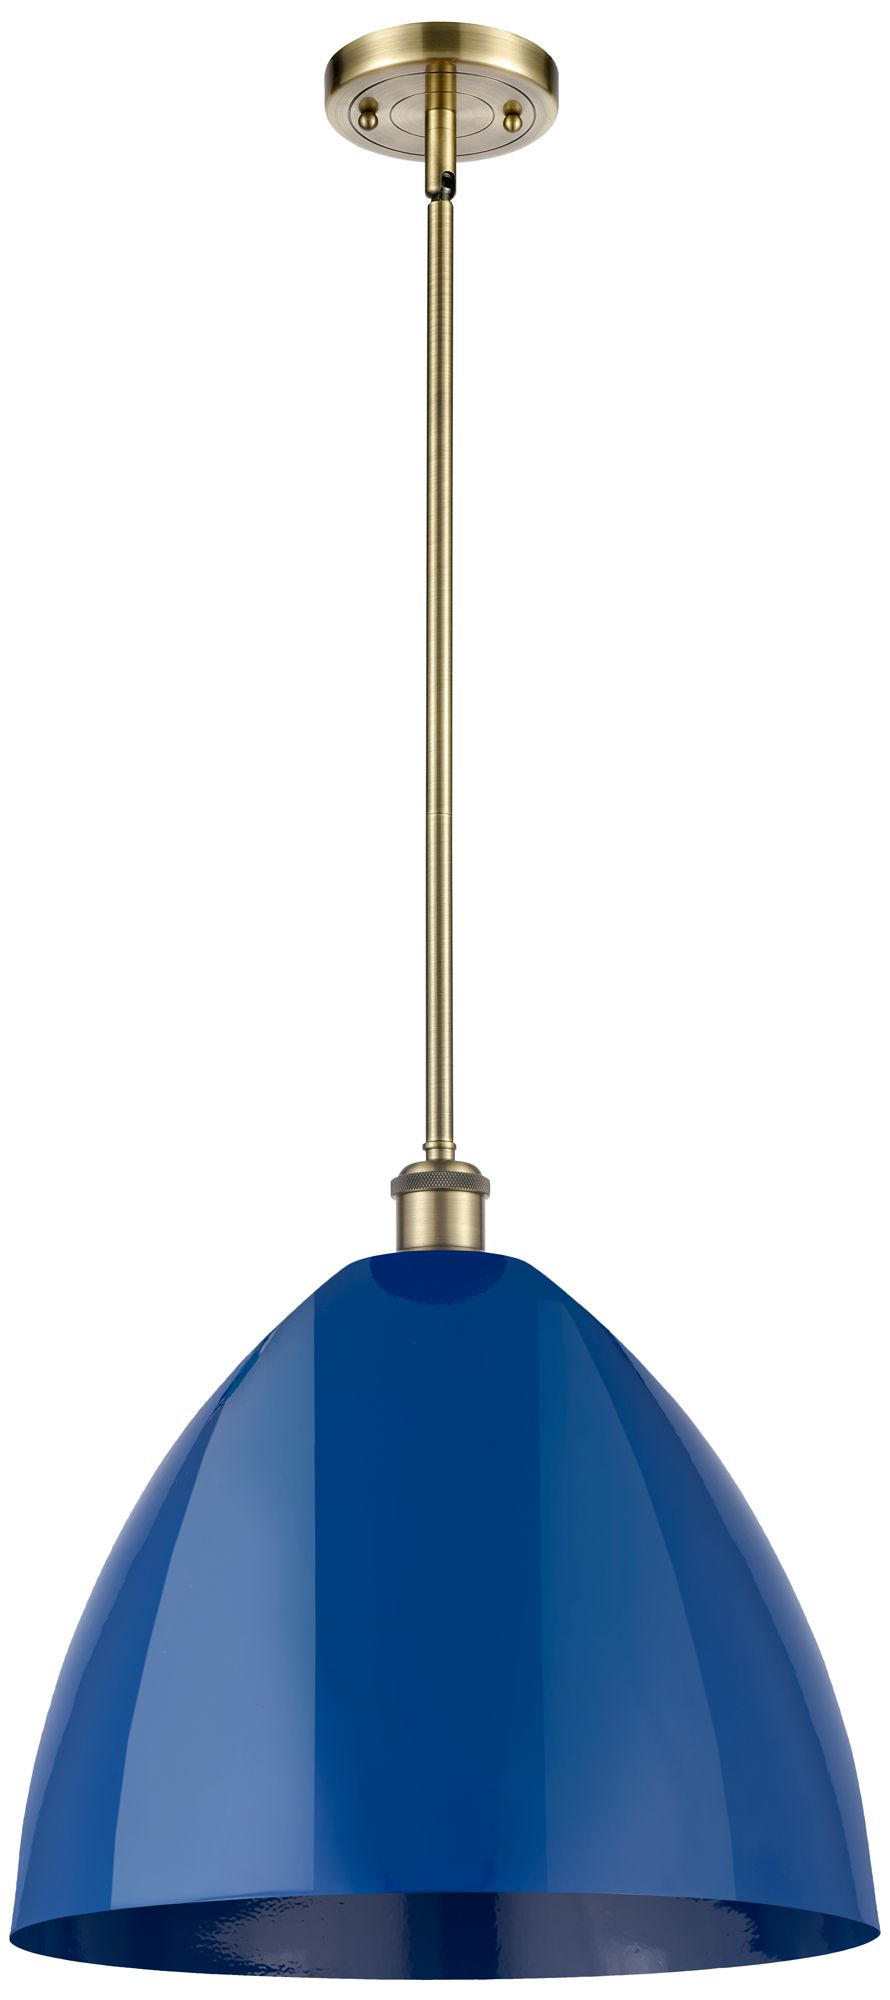 Plymouth Dome 16" Wide Antique Brass Stem Hung Pendant w/ Blue Shade